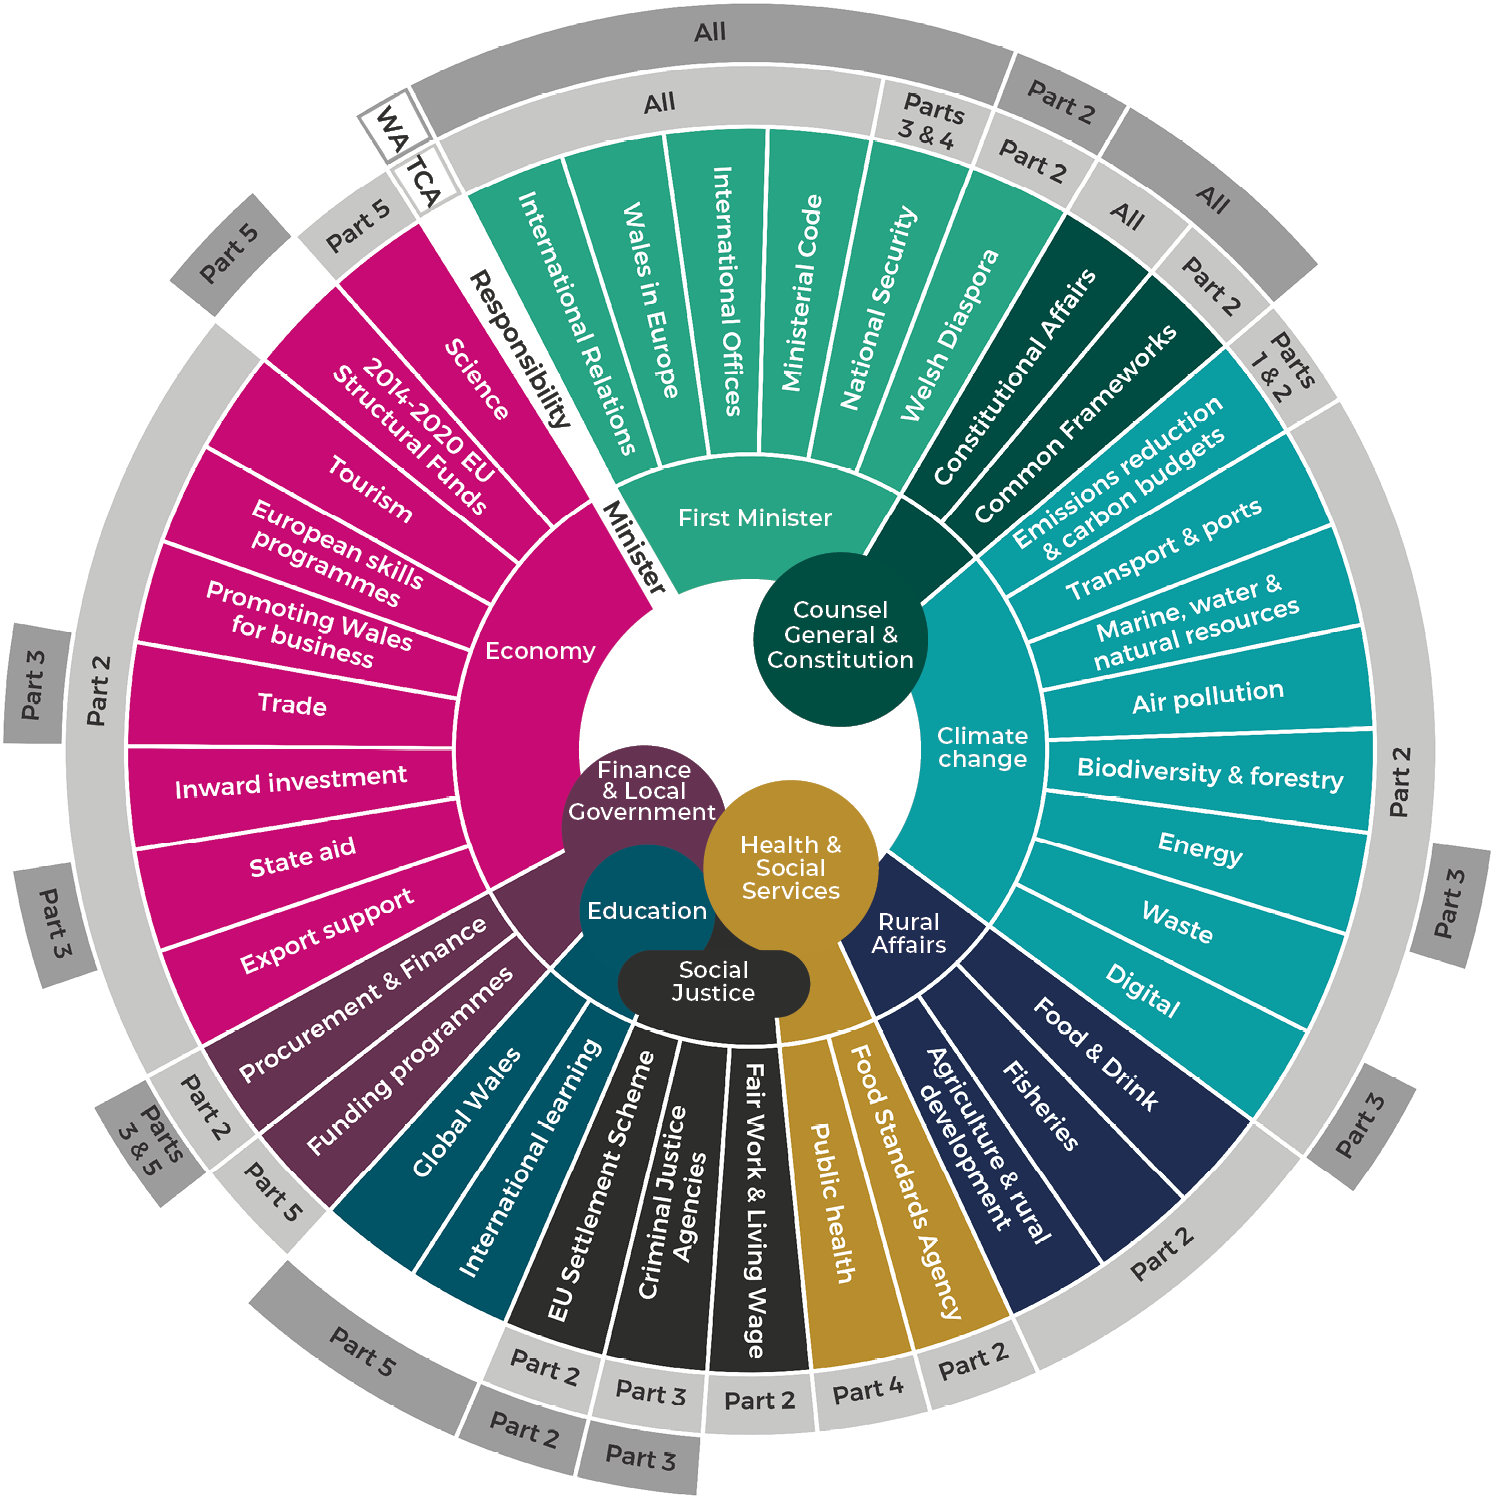 The infographic is a circle comprised of three layers. The central layer shows each Welsh Government Minister, the middle layer shows their relevant UK-EU responsibilities and the outer layer shows the corresponding parts of the treaties. For full details, follow the download link below.